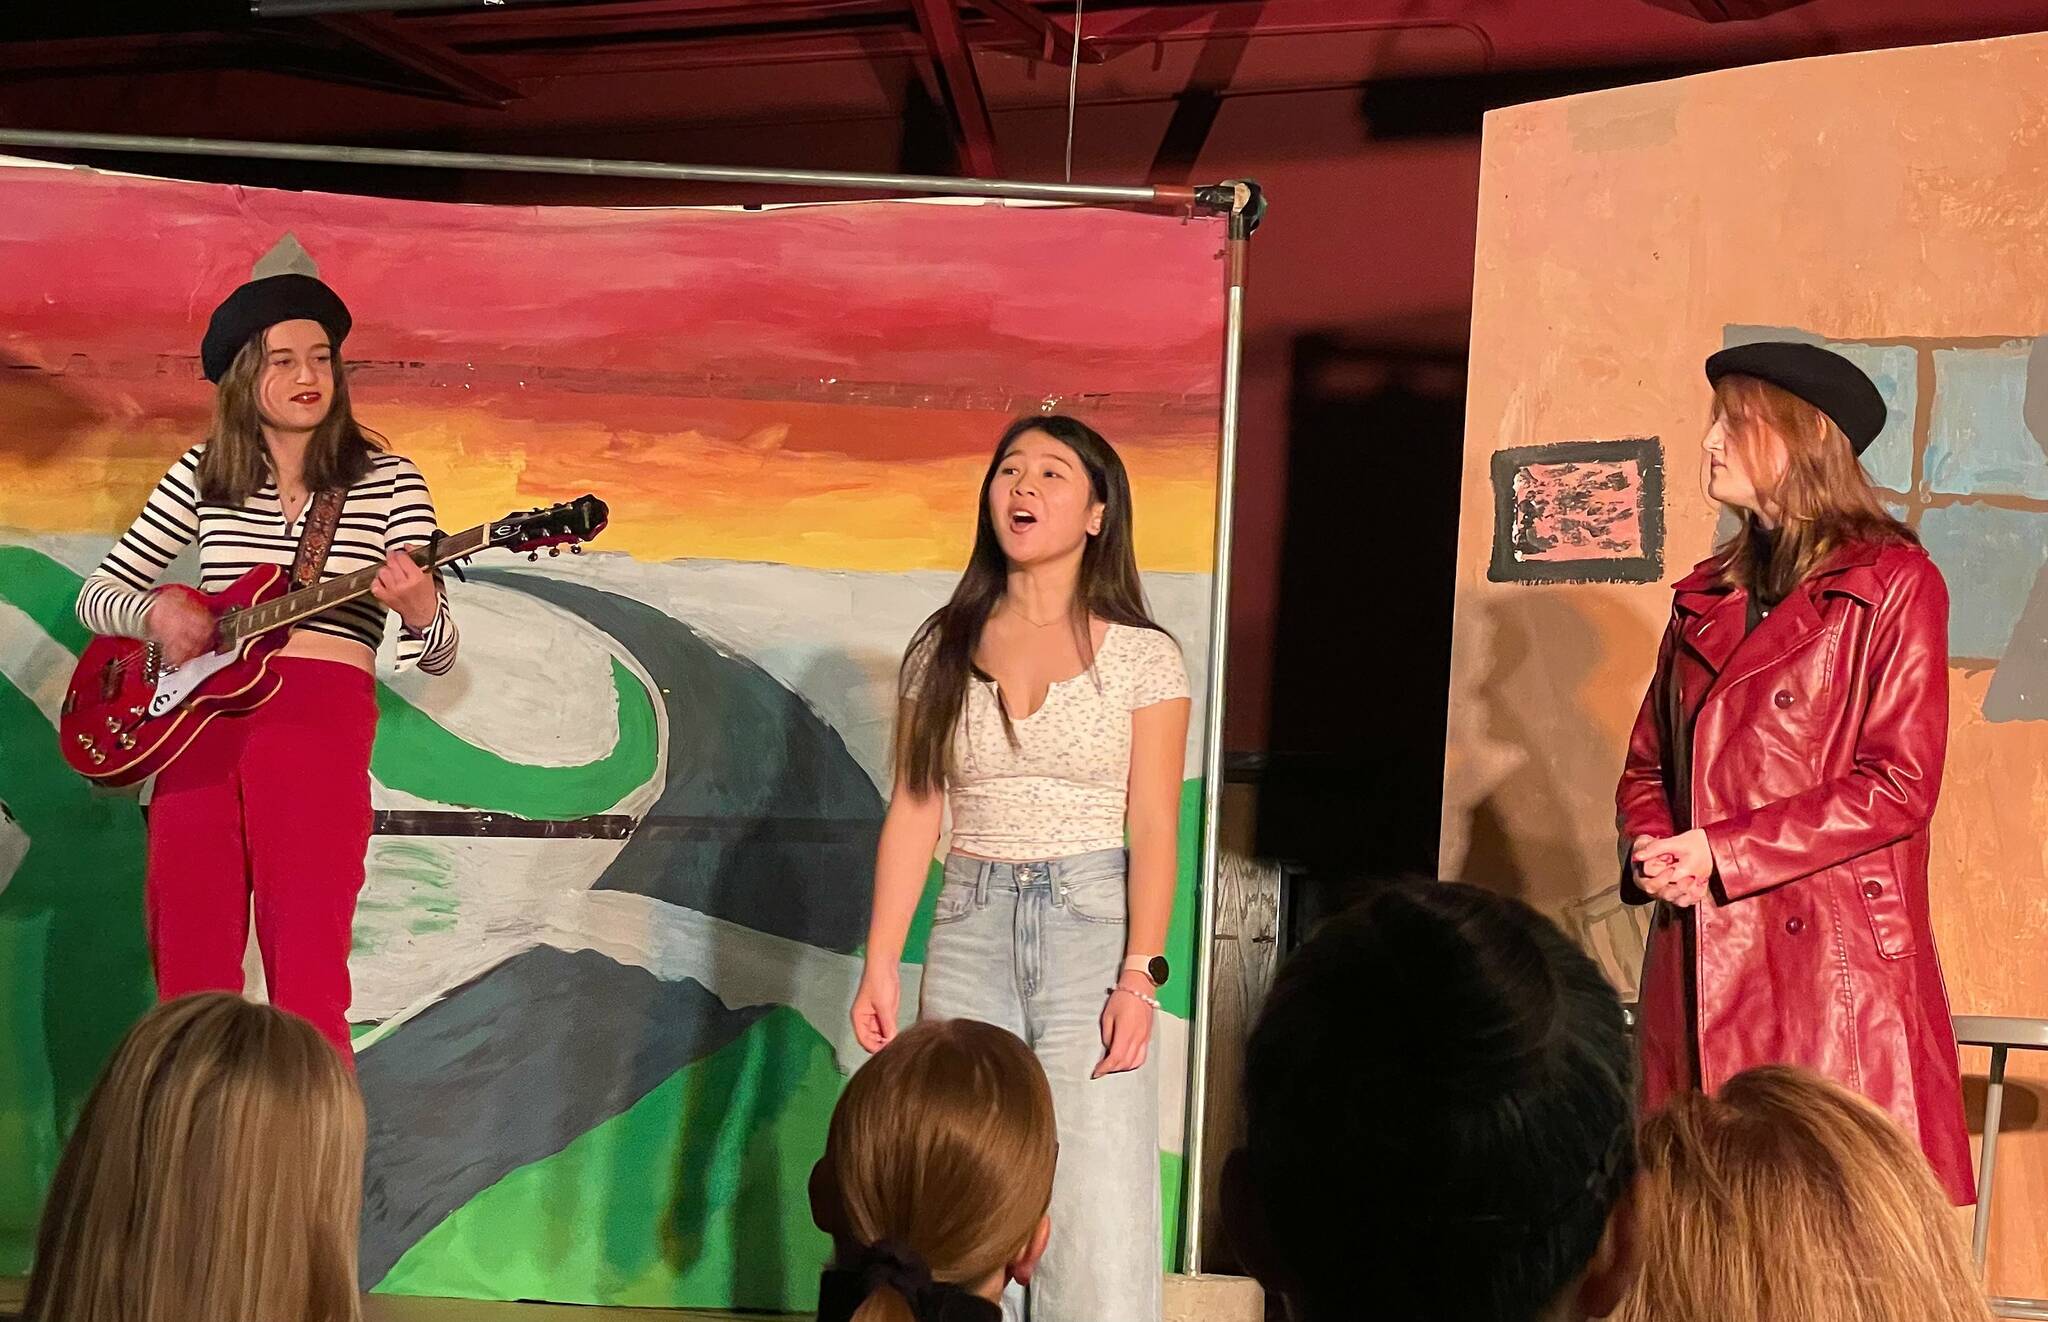 Alinea Kirshenbaum, in the black-and-white striped shirt, debuted her musical “City of Lights” this month at the Federal Way Public Academy. Photos taken and shared by Valerie Bradshaw, FWPA Office Manager / Registrar.